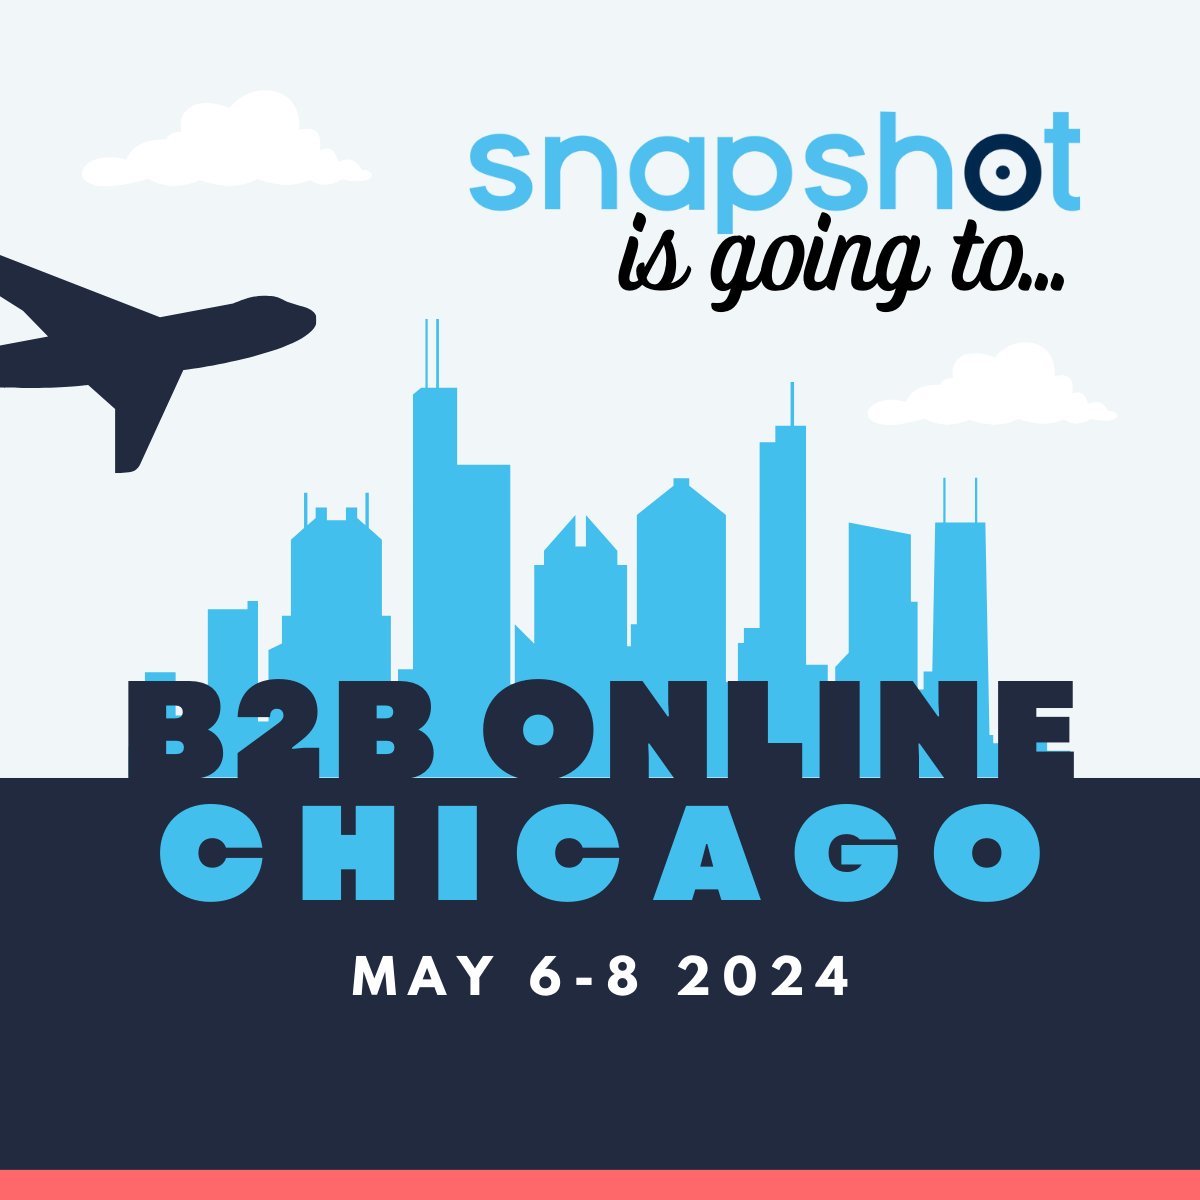 Chicago bound! ️✈️

Snapshot's at #B2BOnline (May 6-8th) to meet partners & discuss B2B eCommerce innovation. 

See you there, @BigCommerce, @_TradeCentric_, @ShopifyPlus 

#Ecommerce #B2BOnline #B2BeCommerce